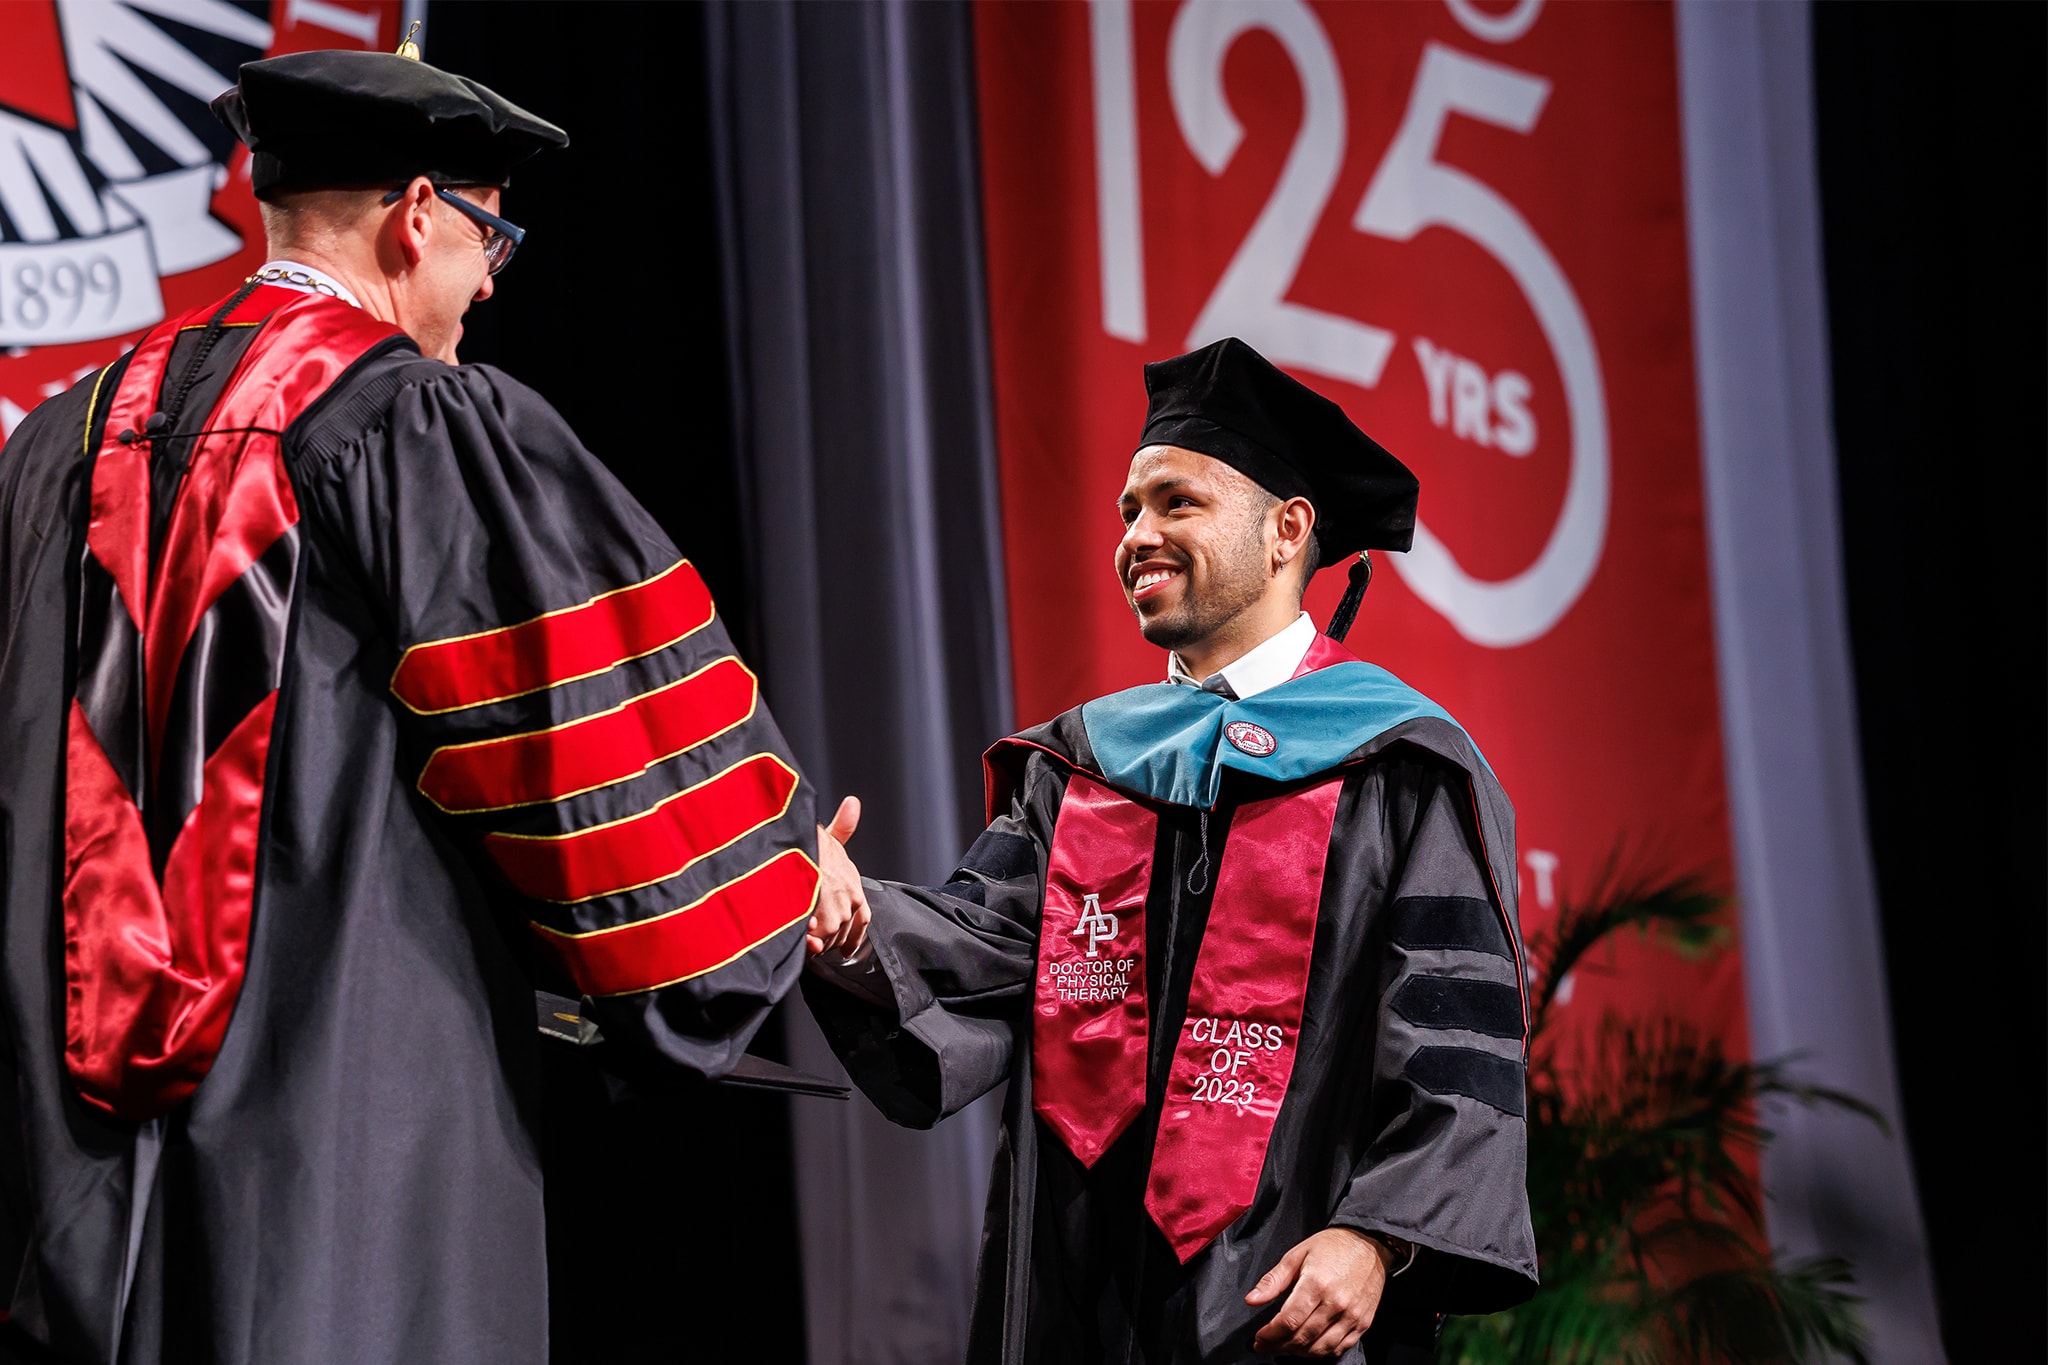 Student shaking hands with President Adam at commencement